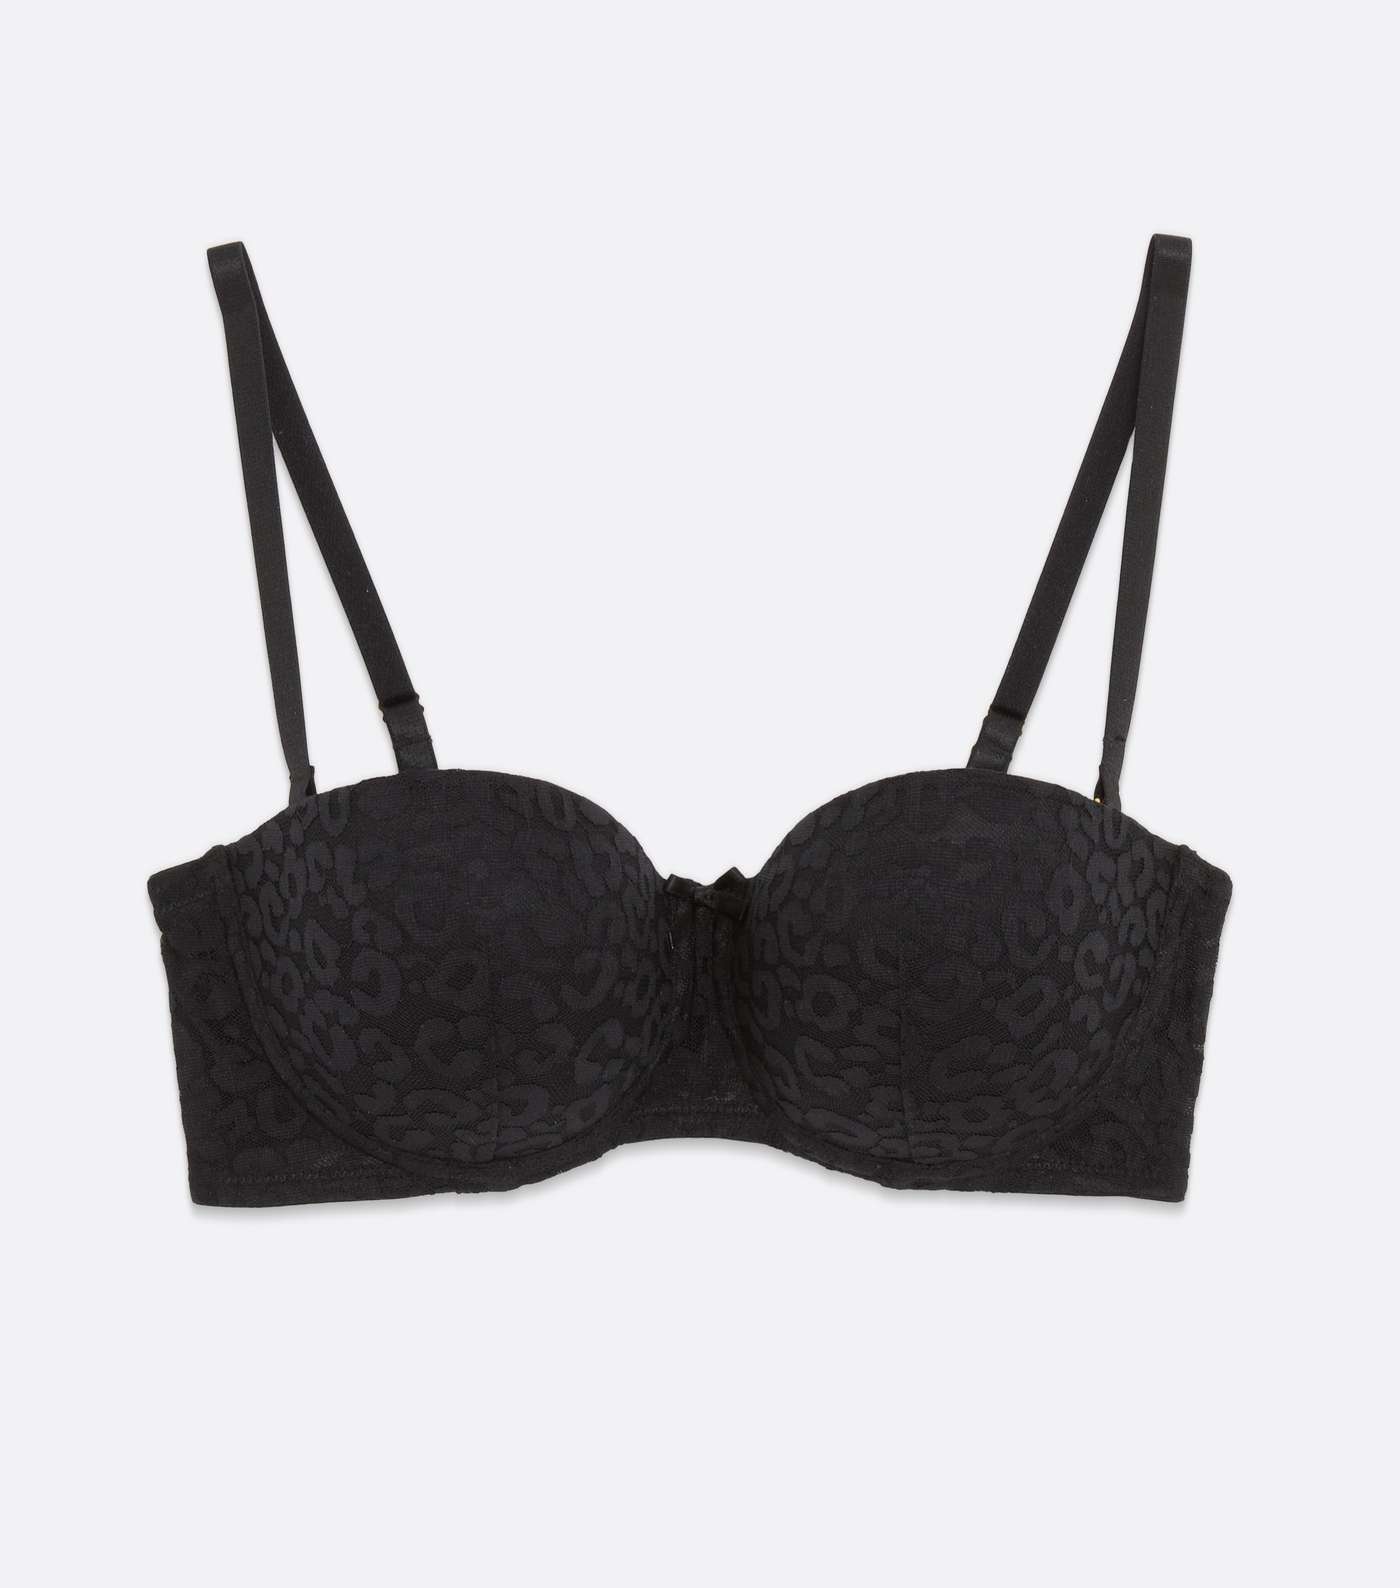 Multiway Bra, Size : 28, 30, 32, 34, 36, etc, Color : Black at Best Price  in Ghaziabad